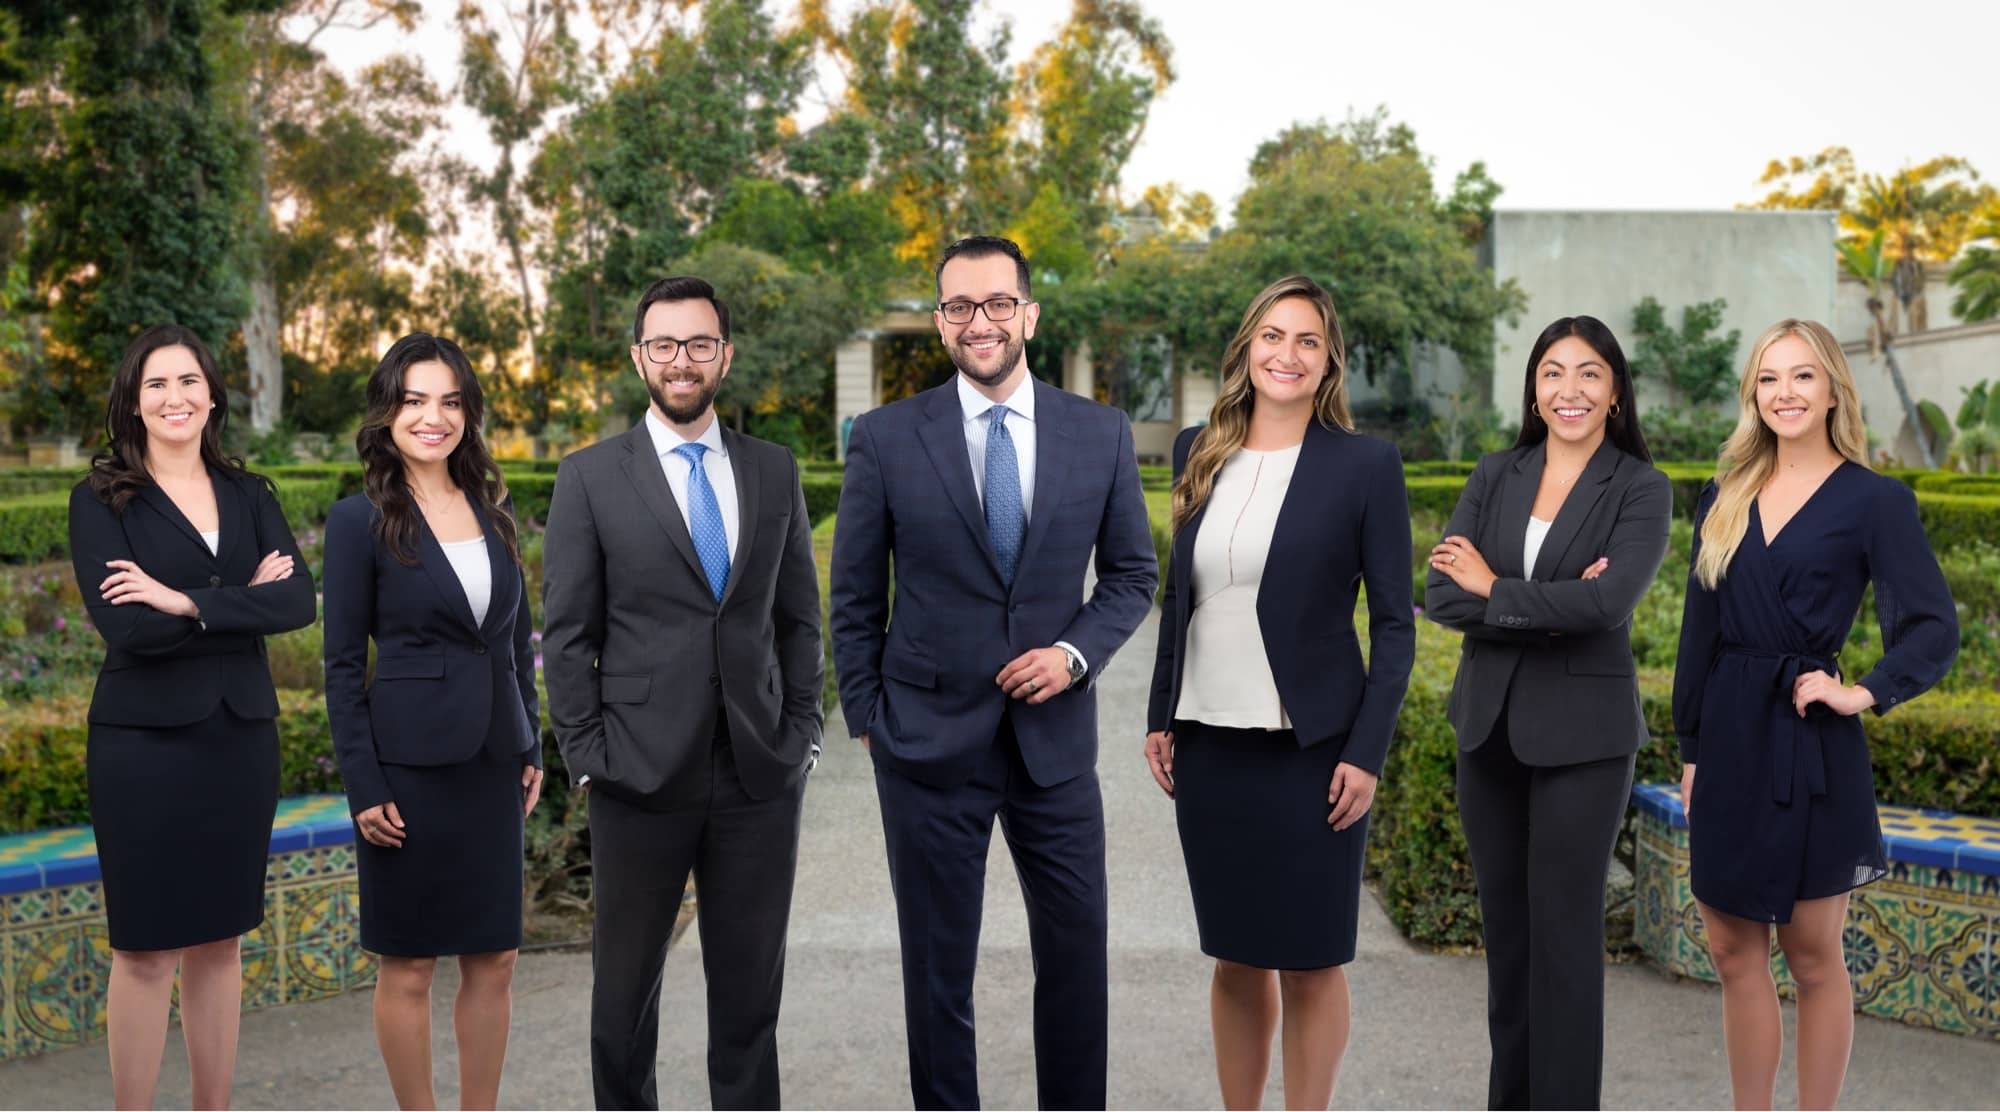 The criminal defense legal team at the Law Office of David P. Shapiro